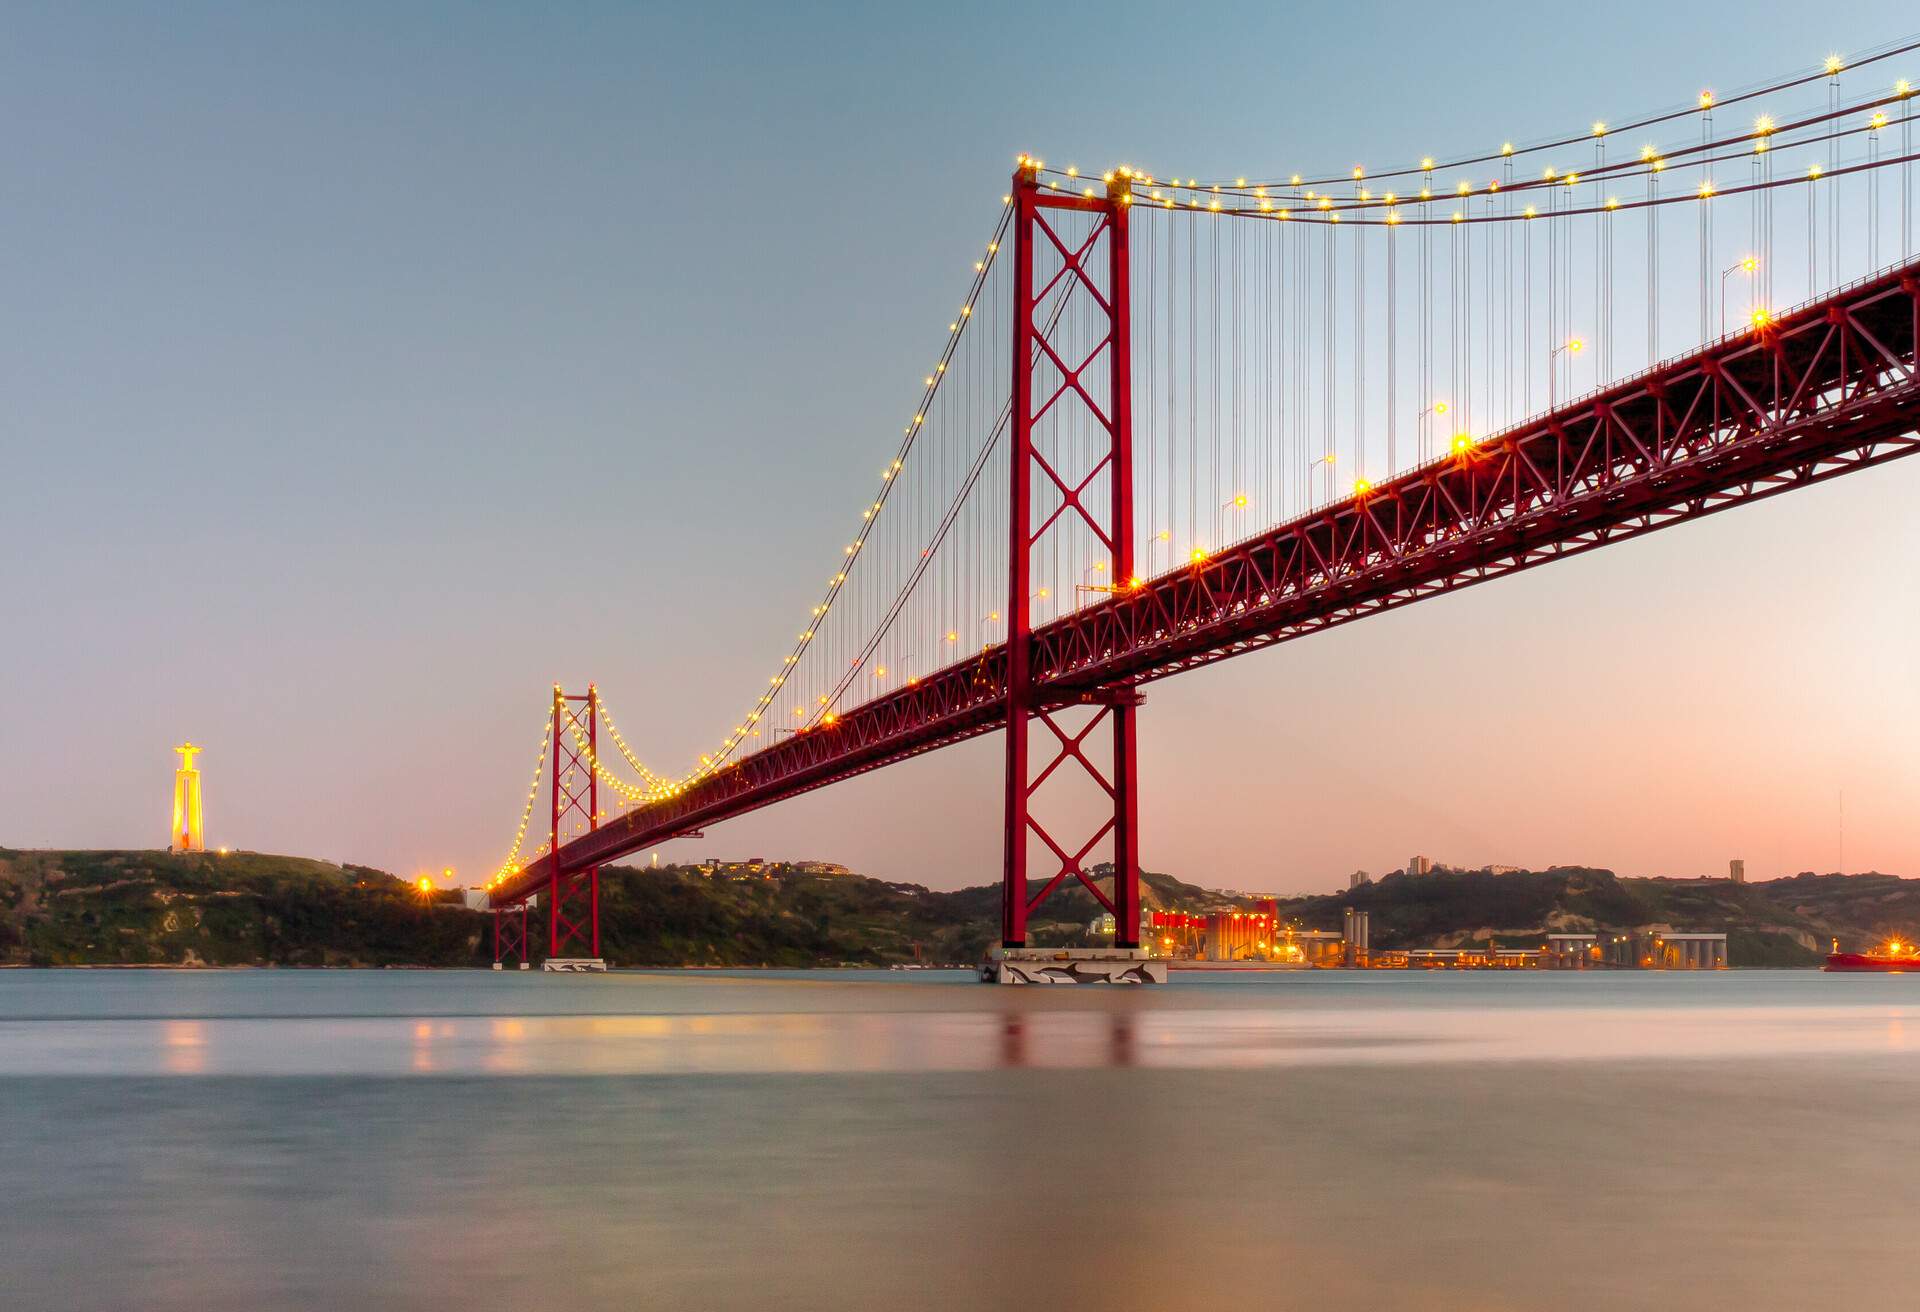 The 25 de Abril Bridge is a suspension bridge connecting the city of Lisbon, to the municipality of Almada on the left bank of the Tagus river.It was inaugurated on August 6, 1966 and a train platform was added in 1999.